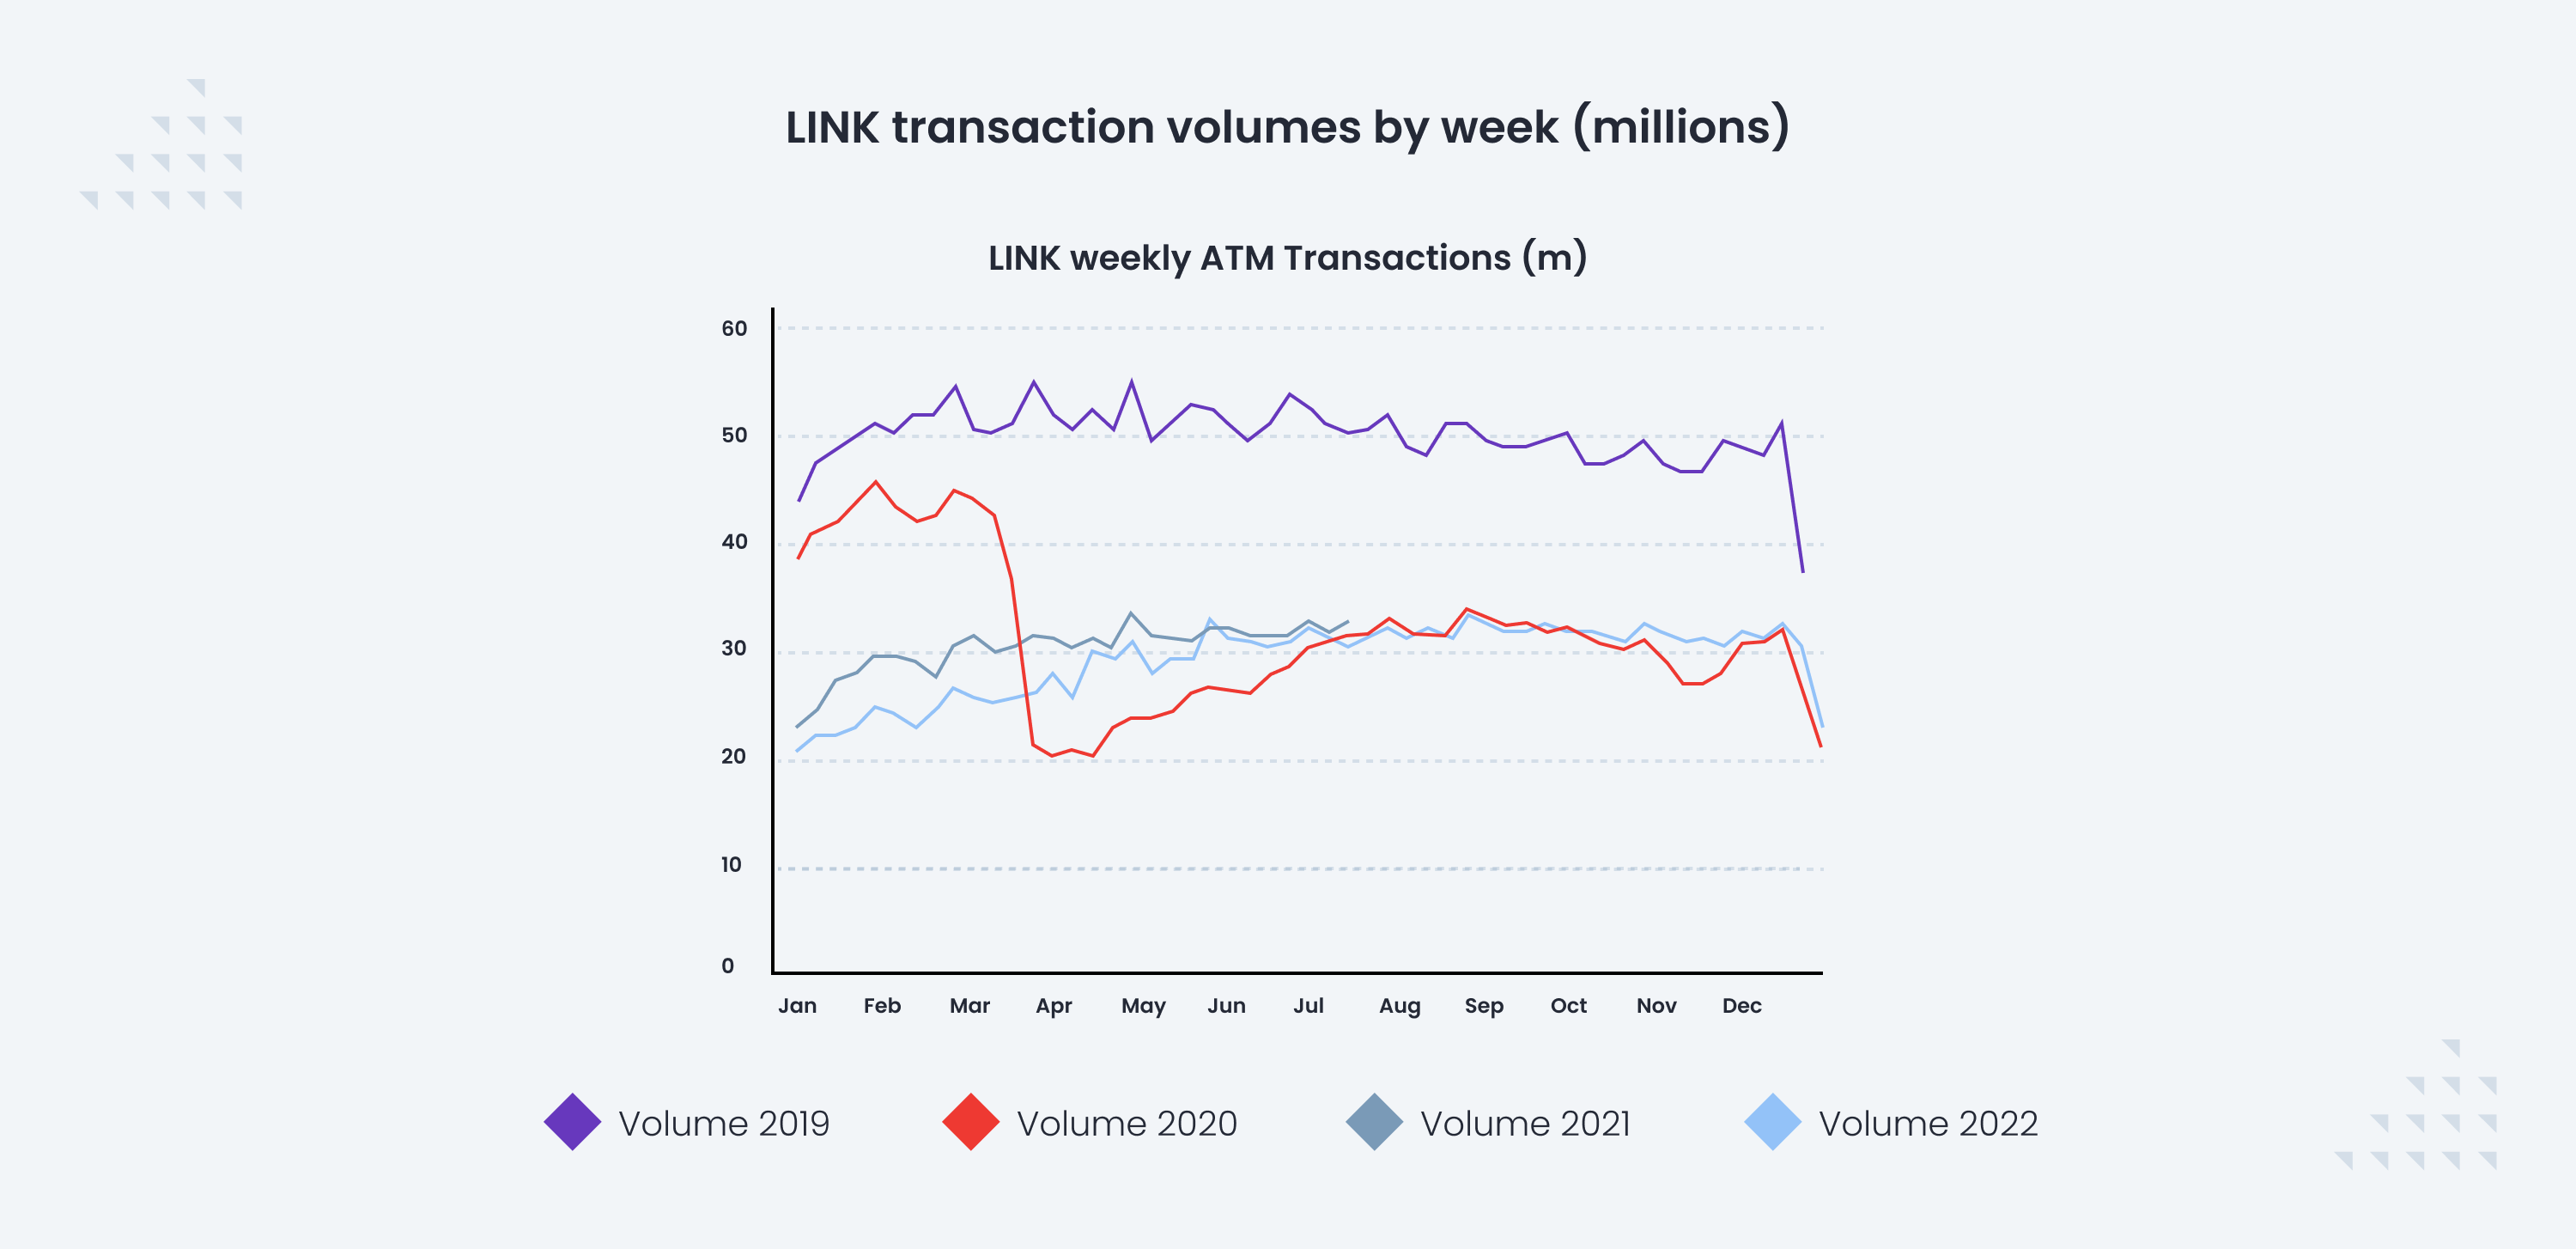 LINK transaction volumes by week (millions)